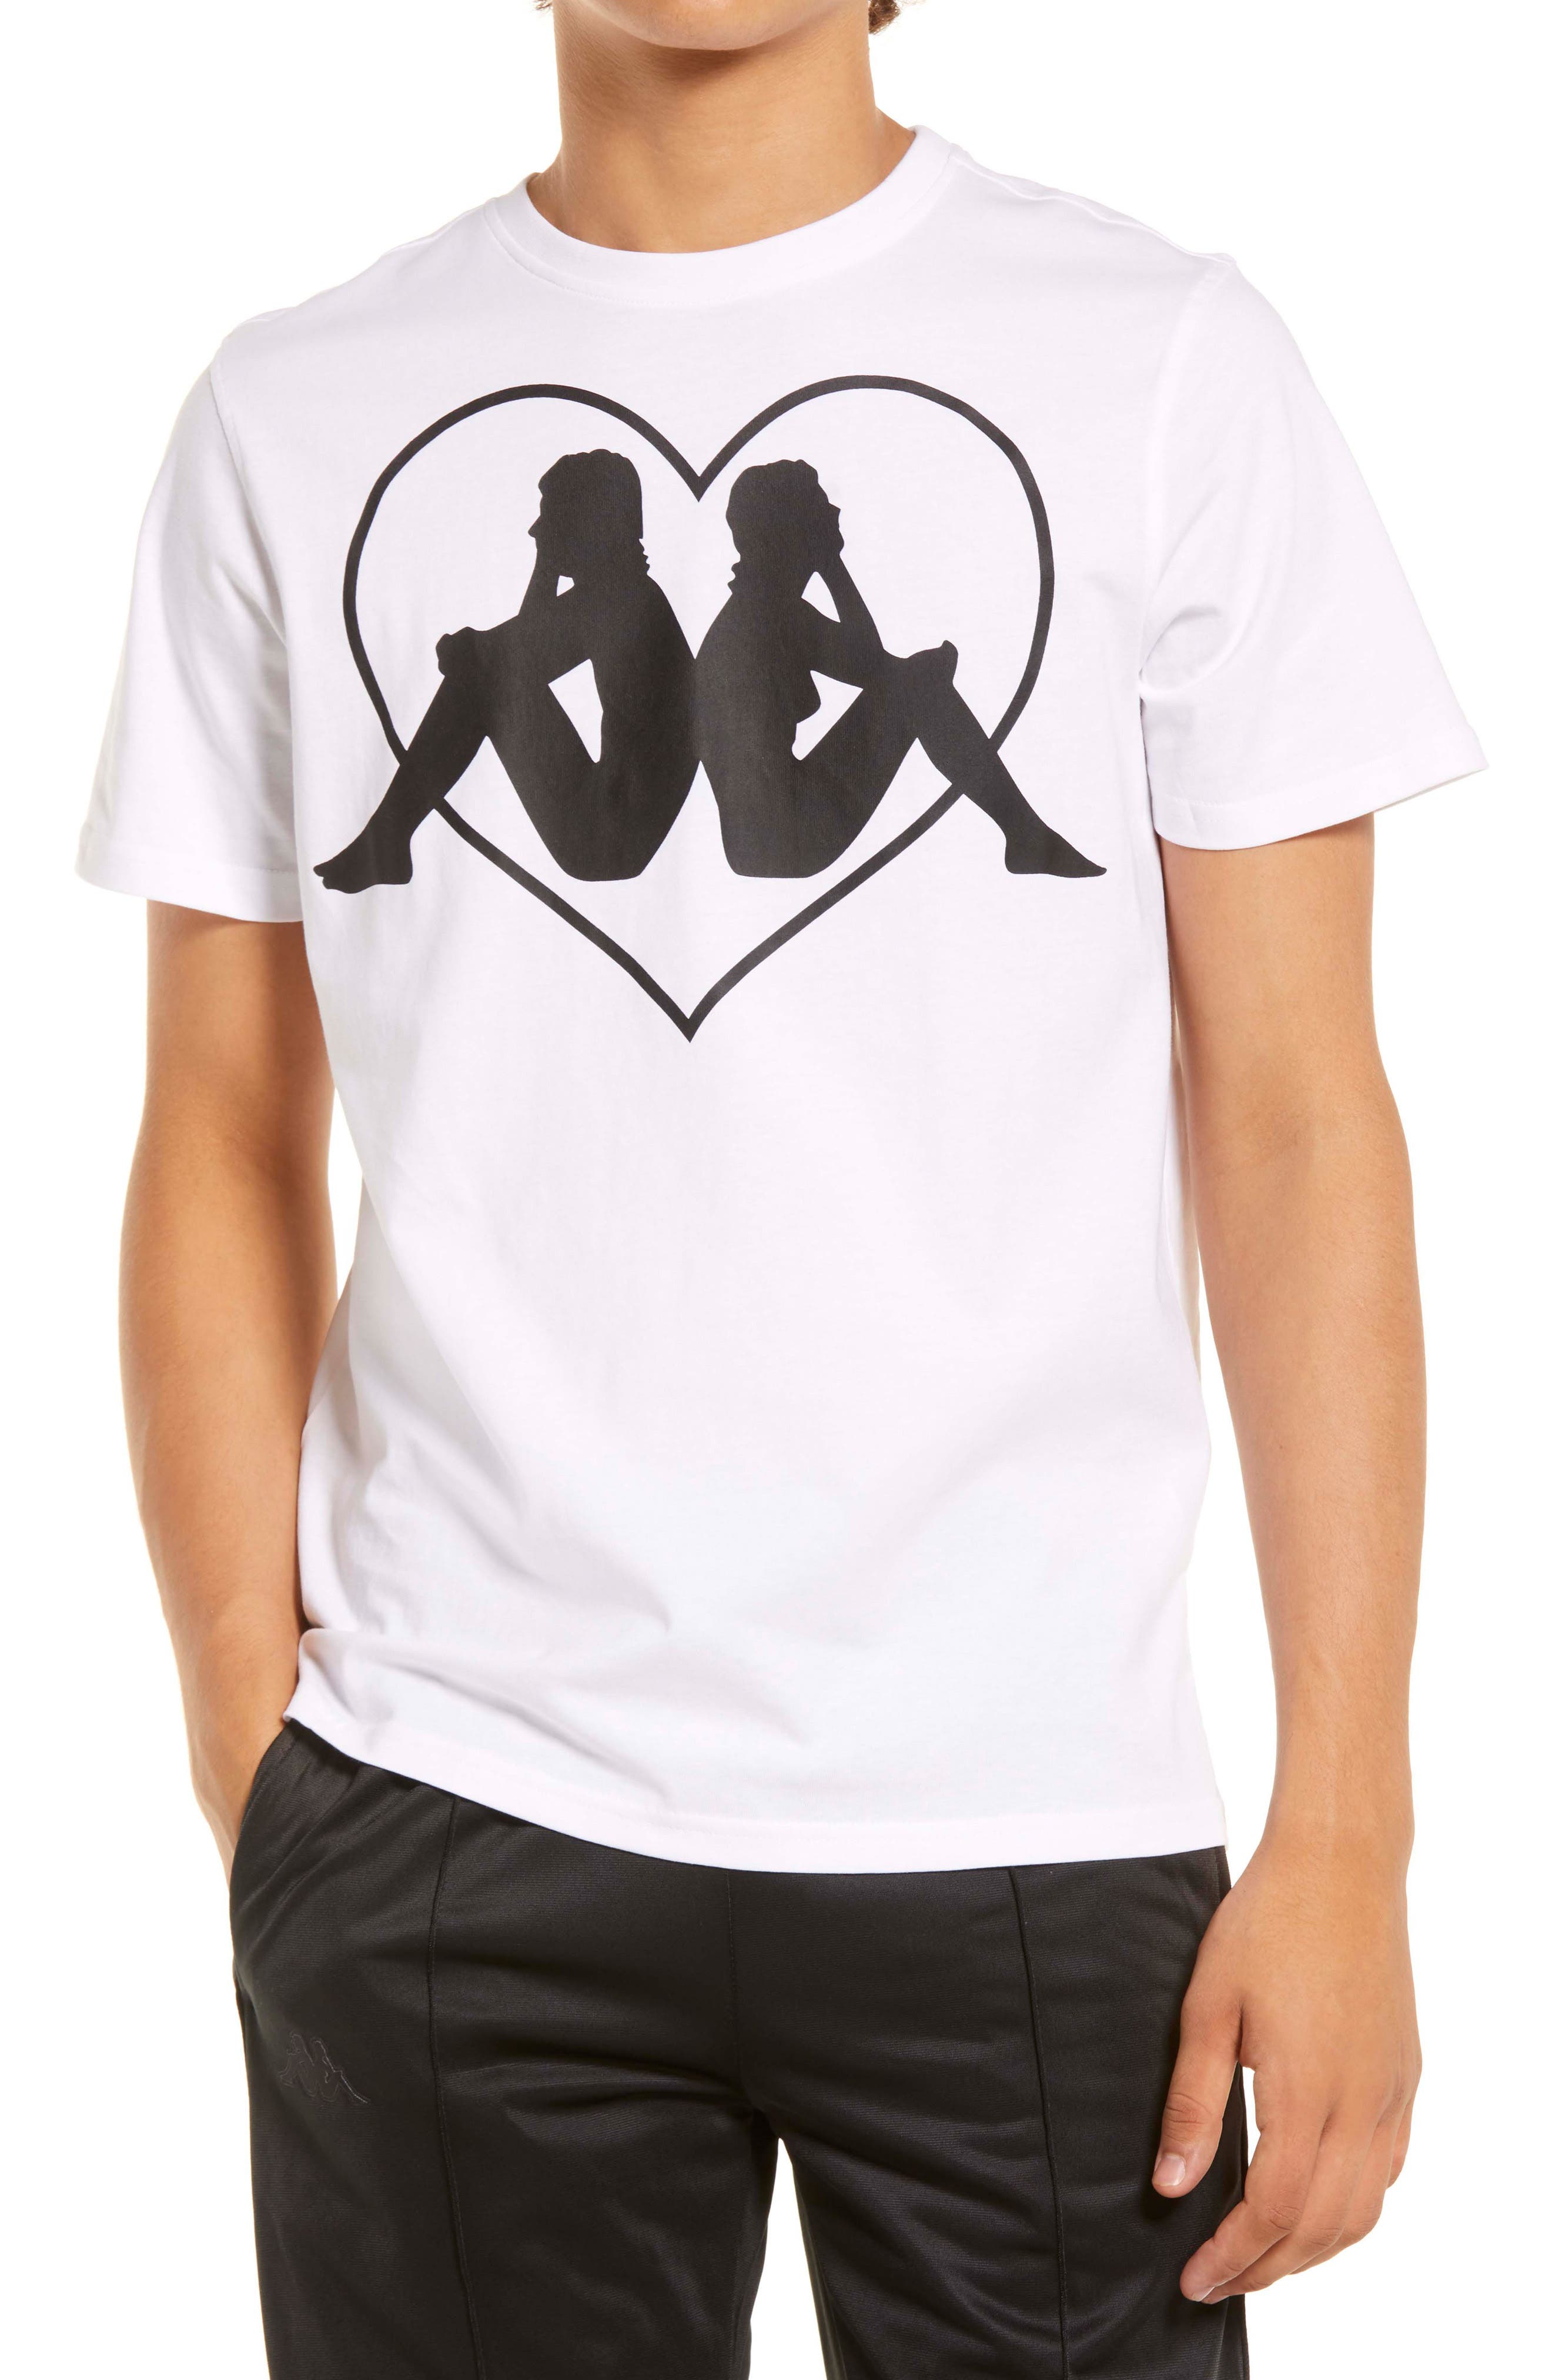 Kappa Authentic Zielona Graphic Tee in Bright White-Black Smoke at Nordstrom, Size X-Large